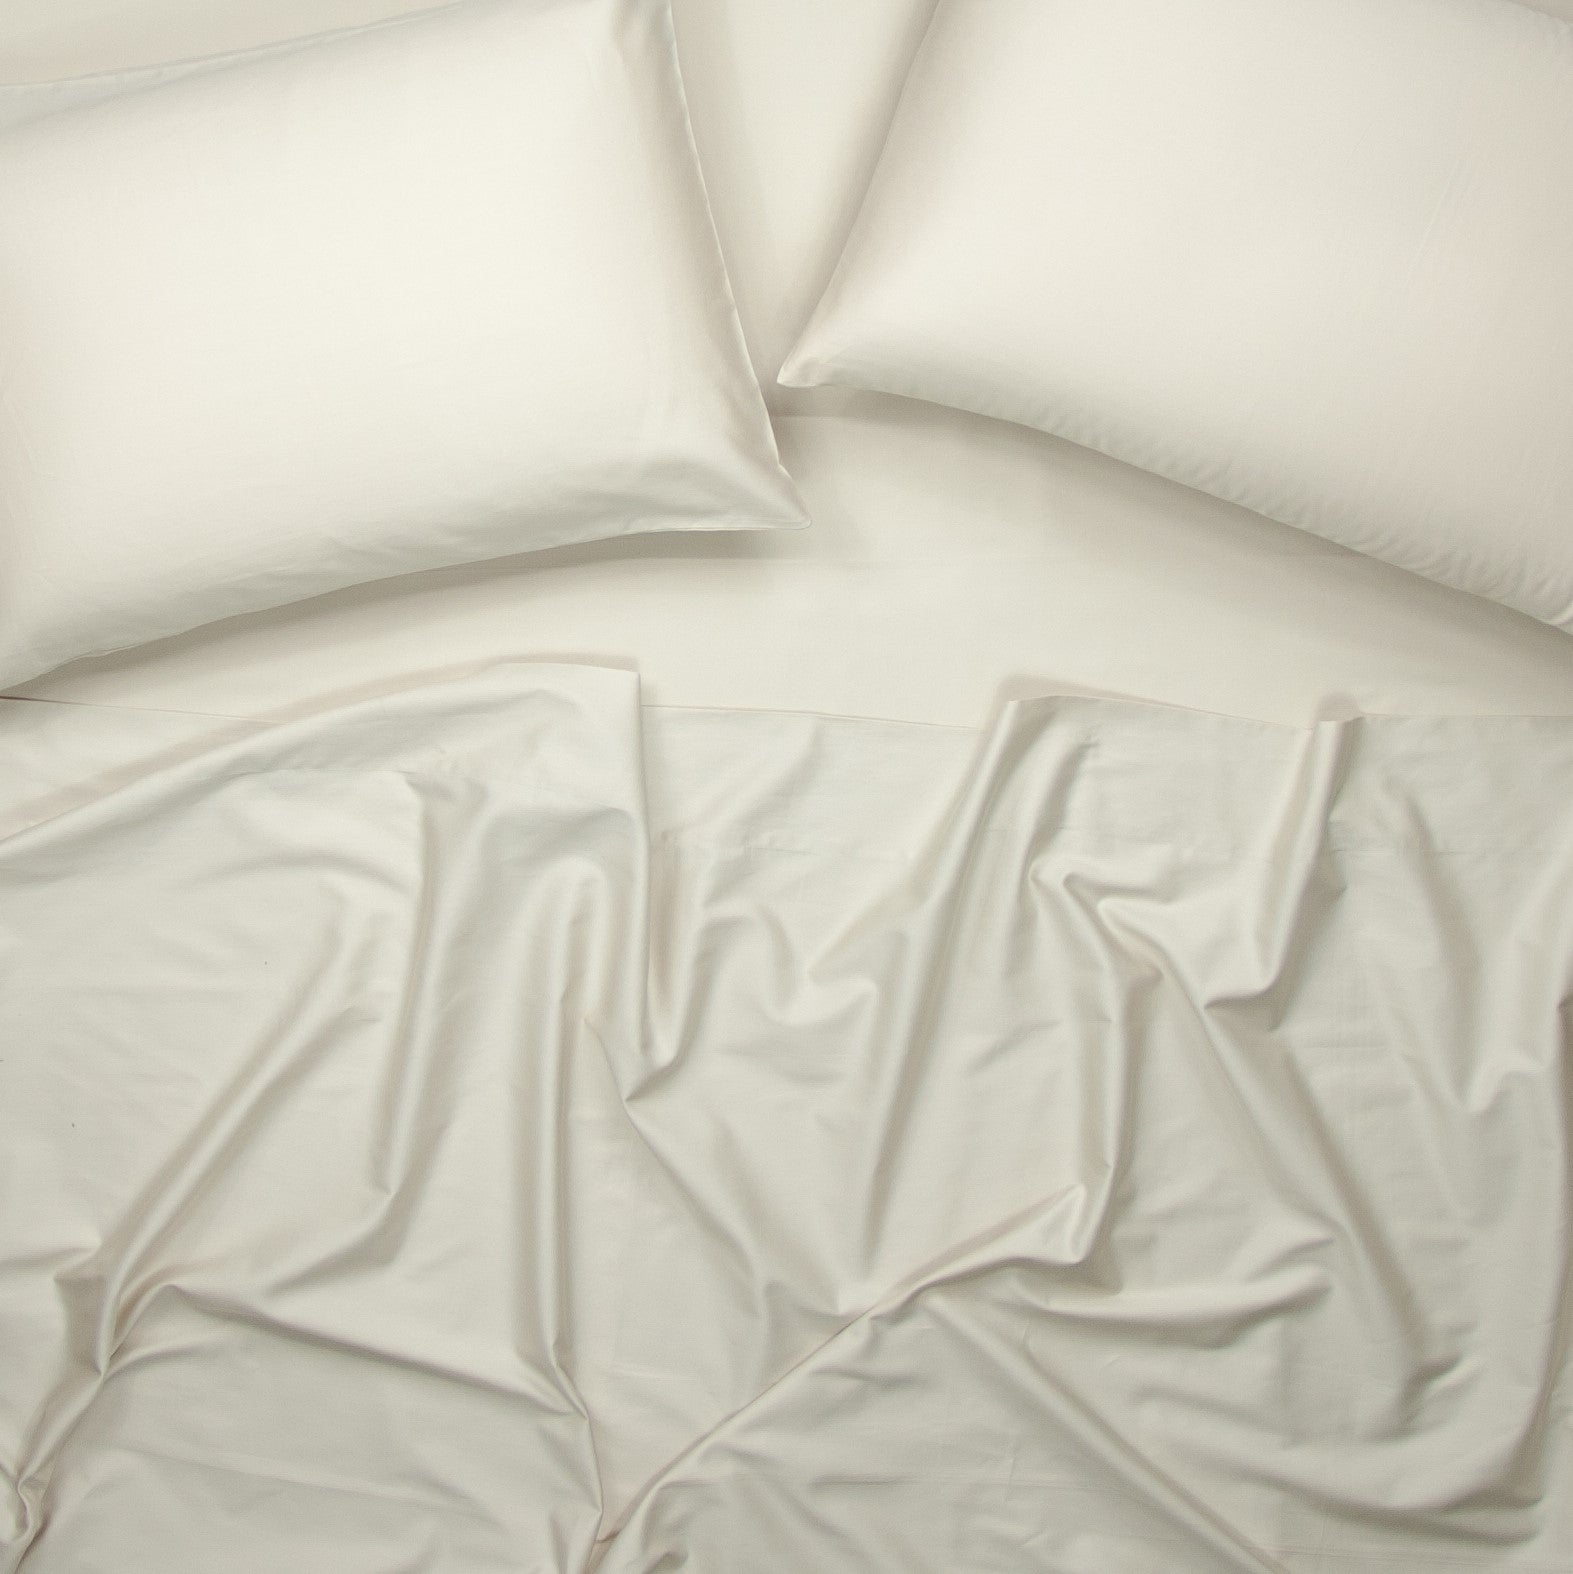 Birds eye view of organic cotton bed sheets with pillowcases in egg shell white